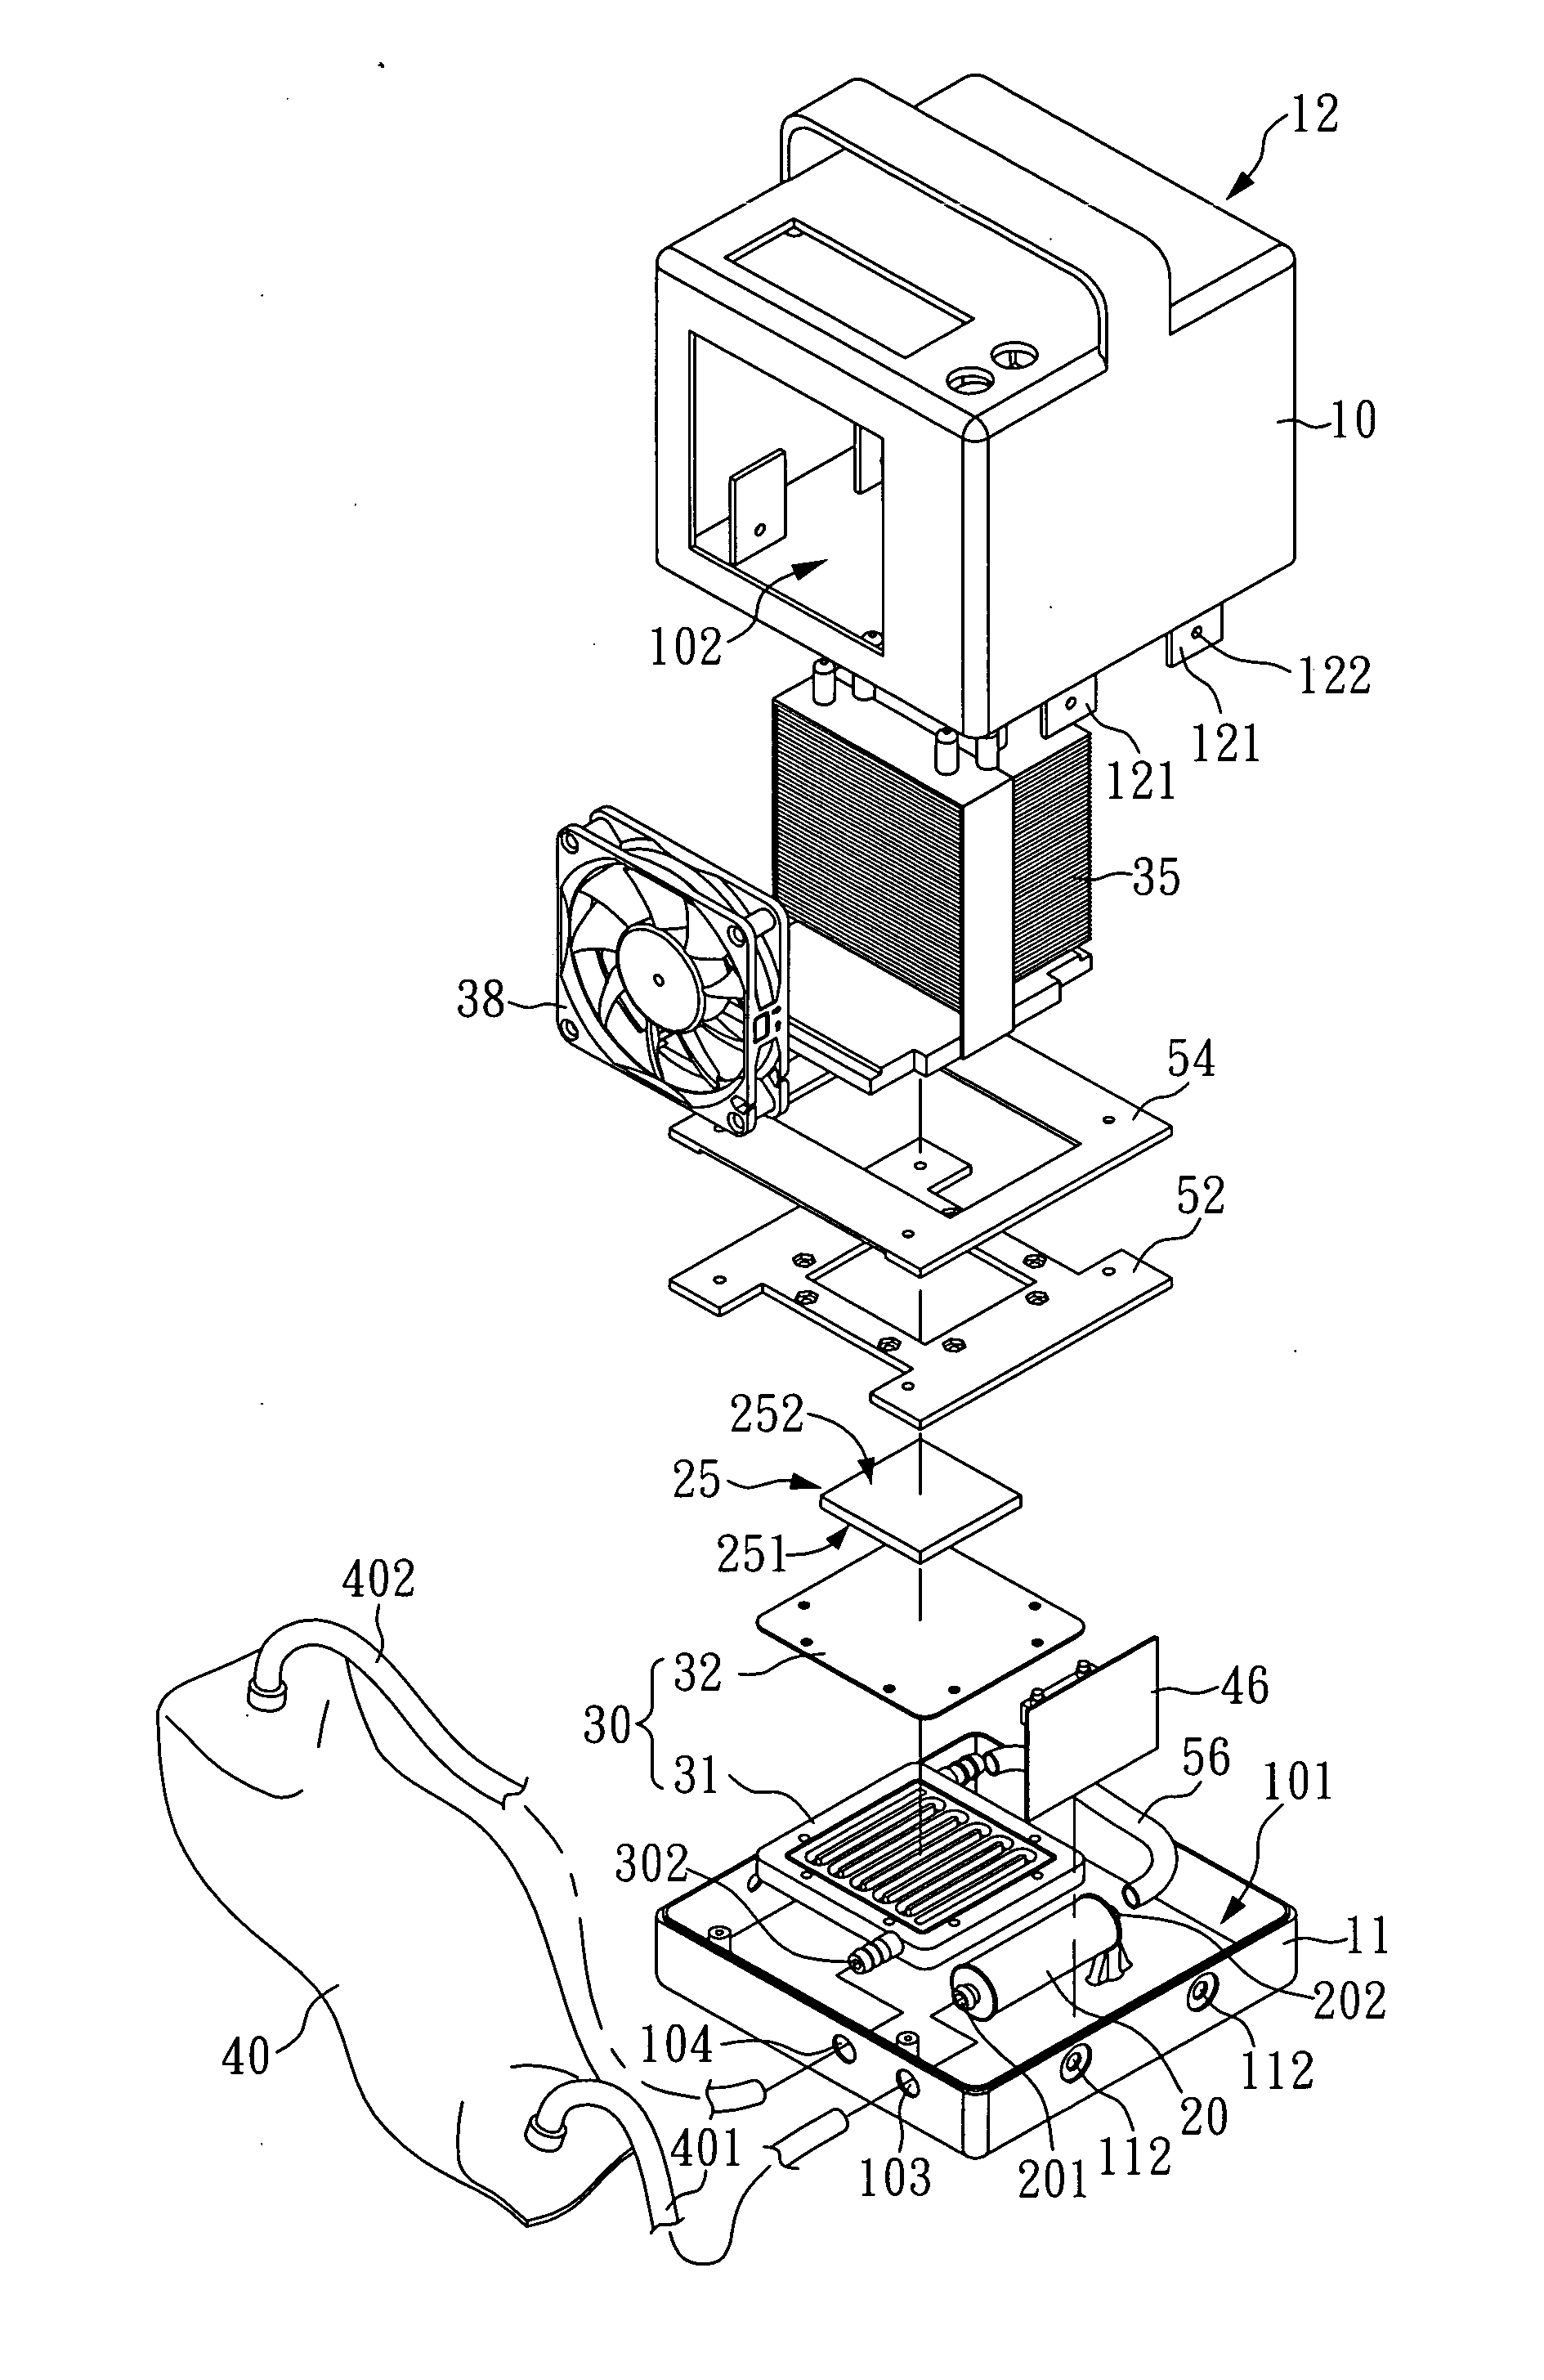 Cold/hot therapy device with temperature control